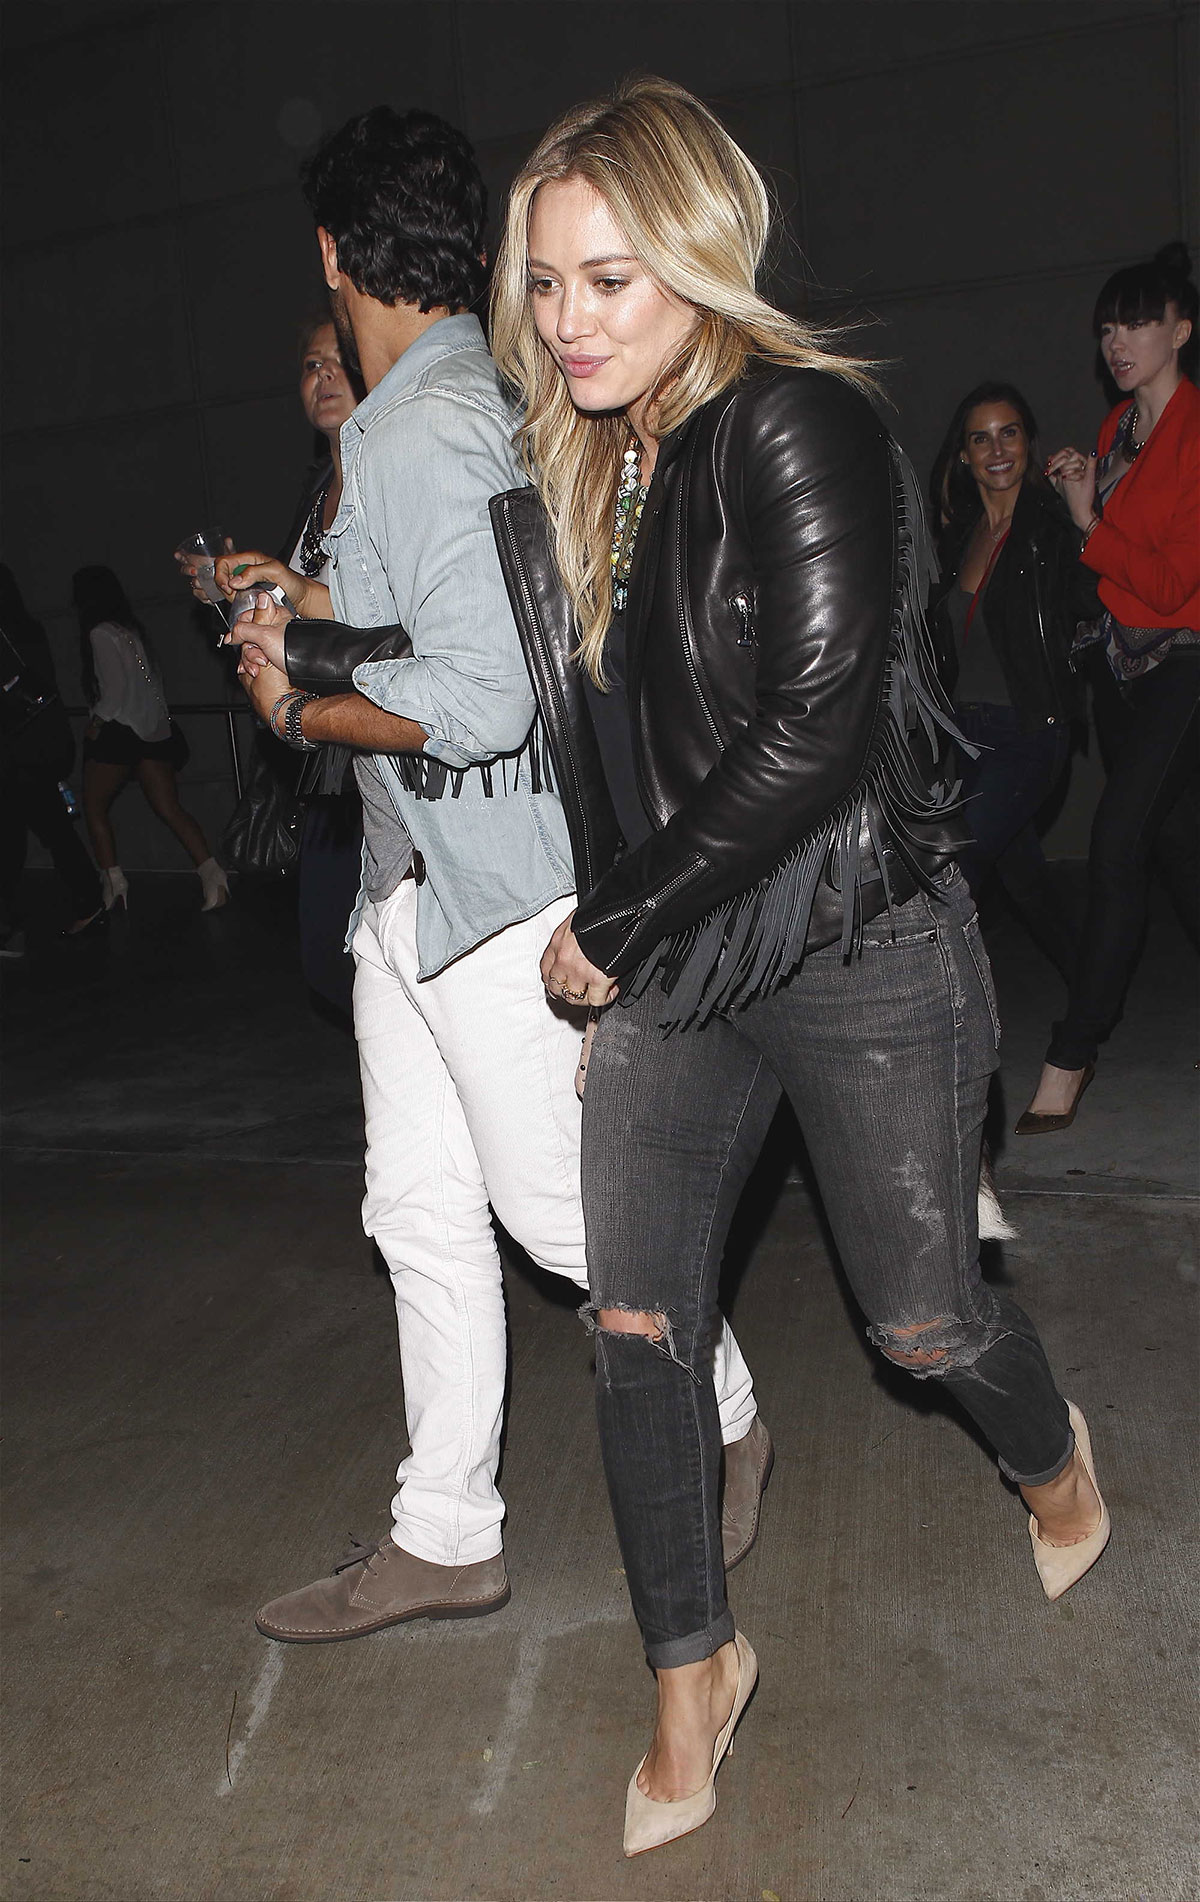 Hilary Duff at Staples Centre for a Miley Cyrus Concert